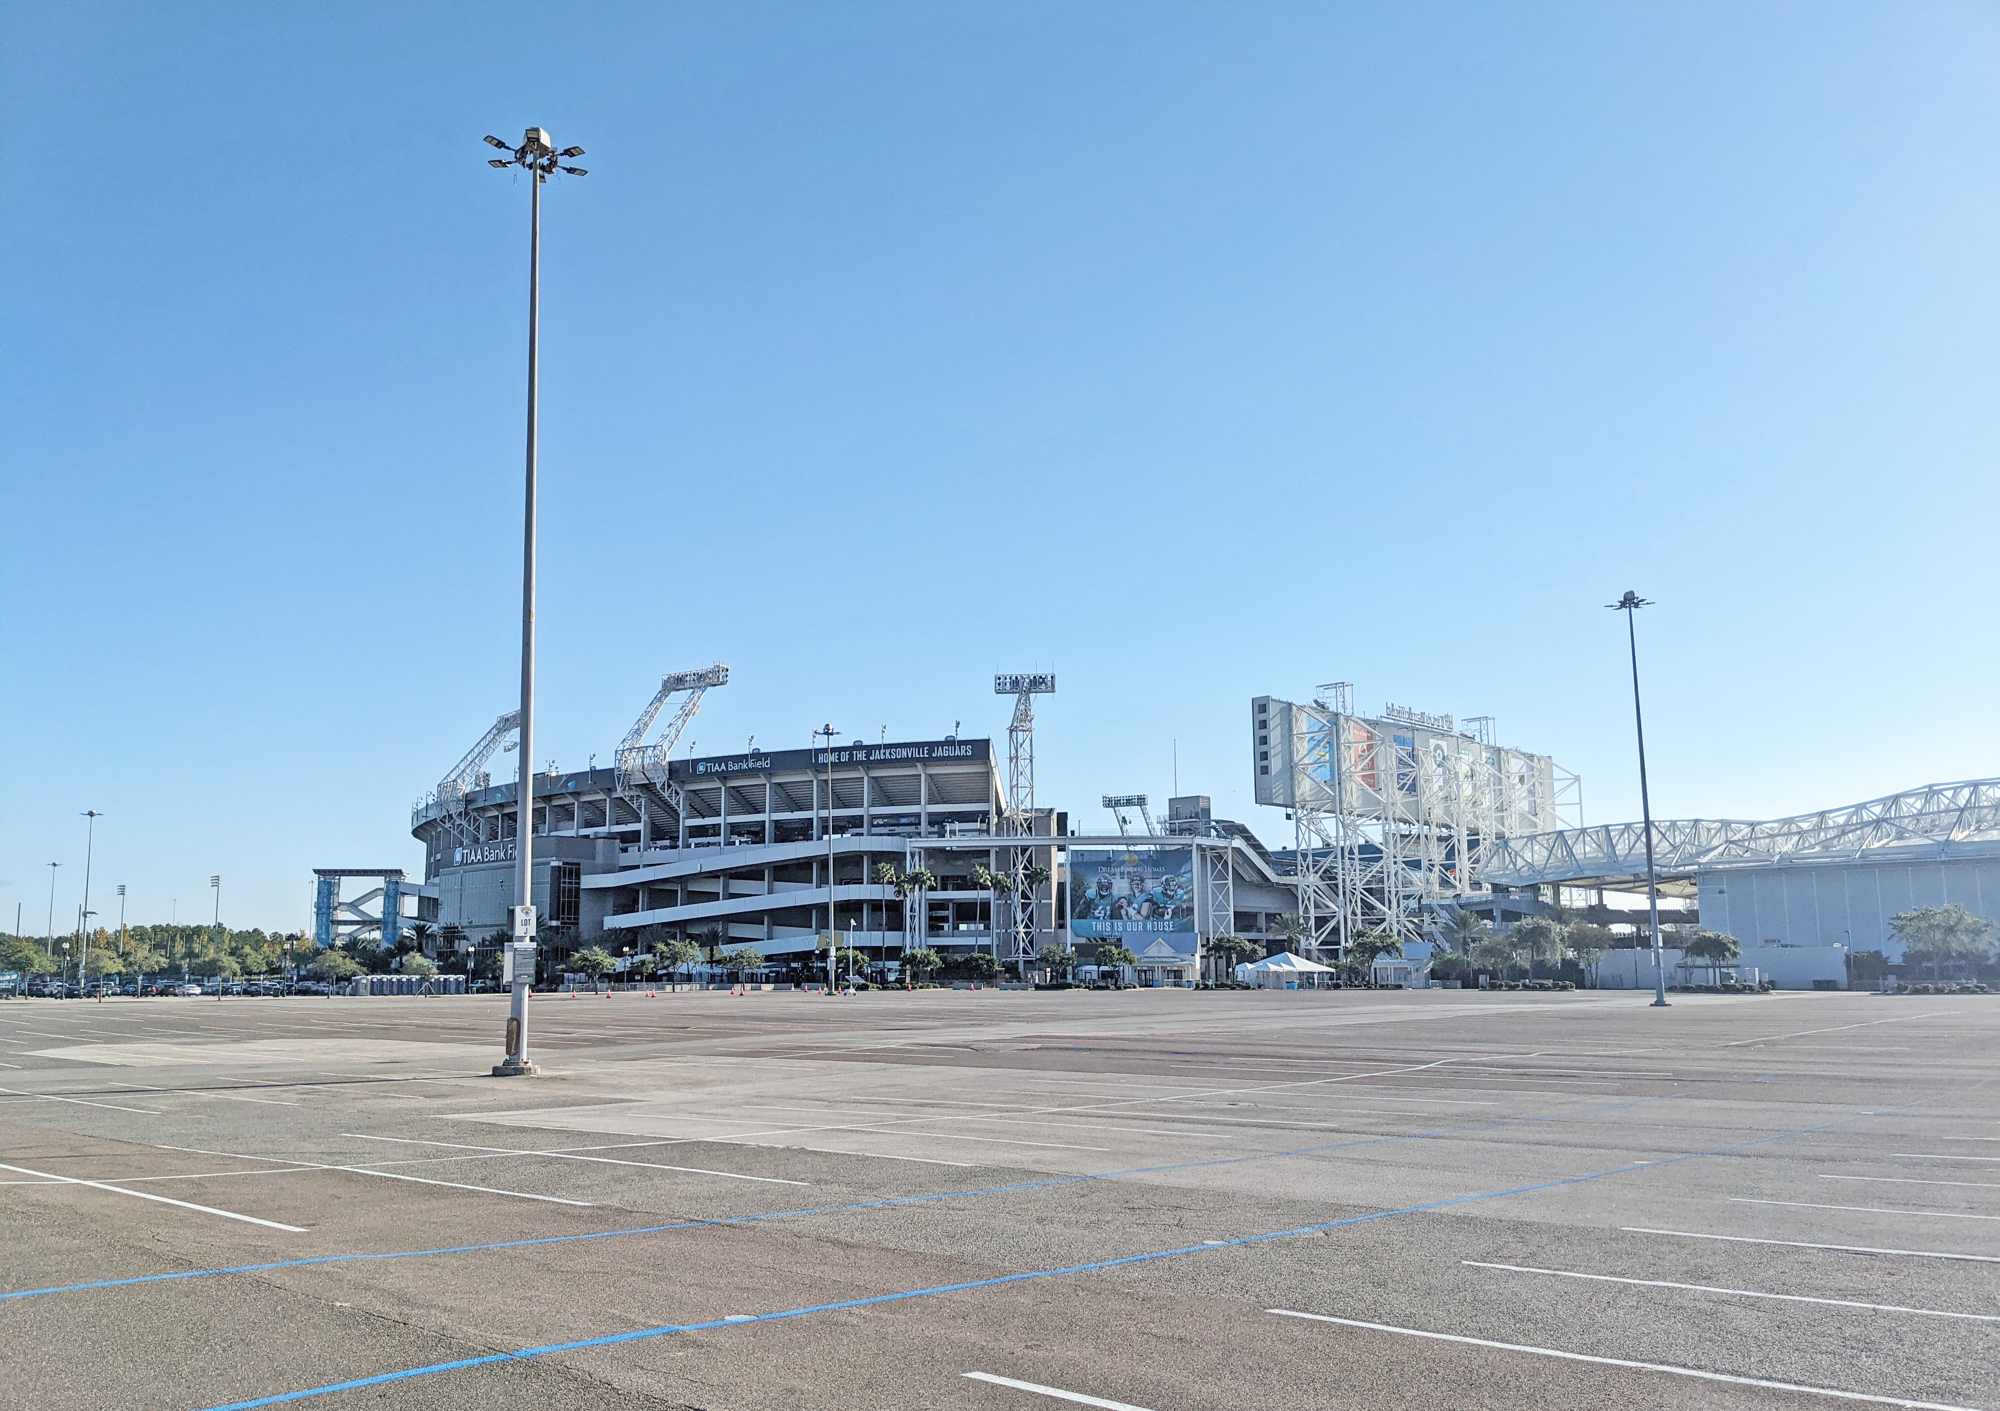 Lot J adjacent to TIAA Bank Field was proposed for a mixed-use development but failed to win city incentives.